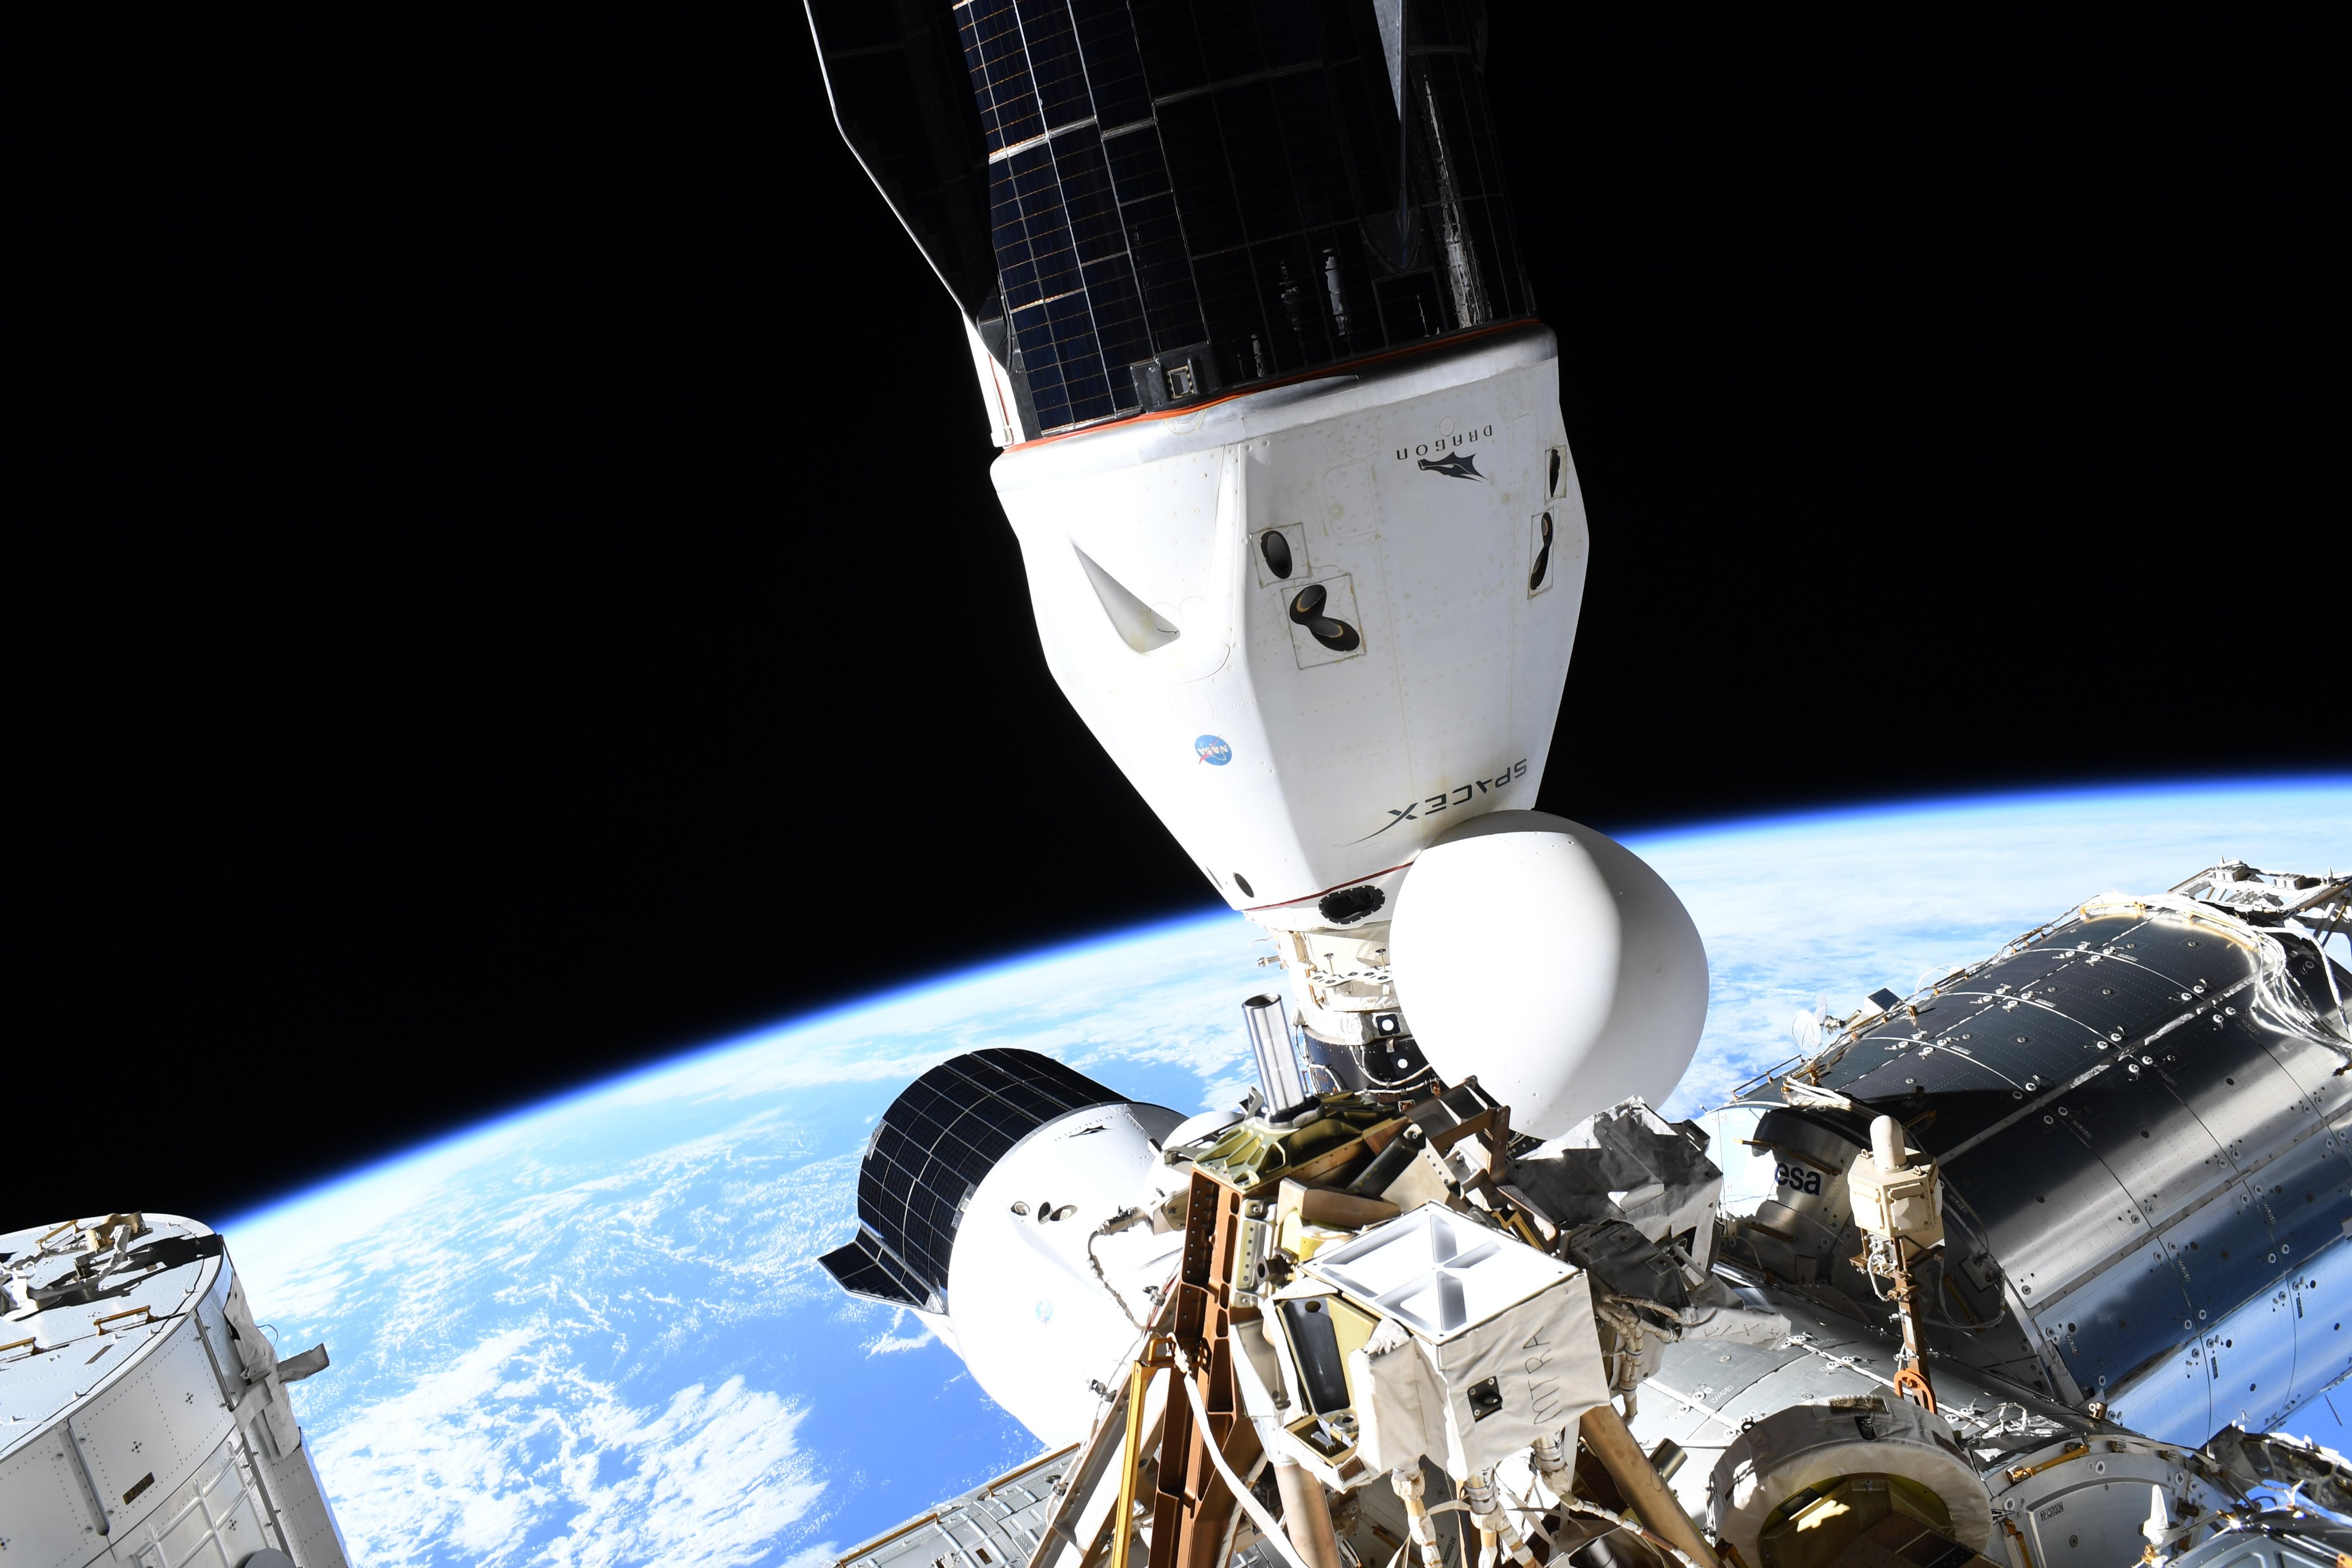 (Updated) NASA and SpaceX defer Dragon resupply ship's undocking from space station